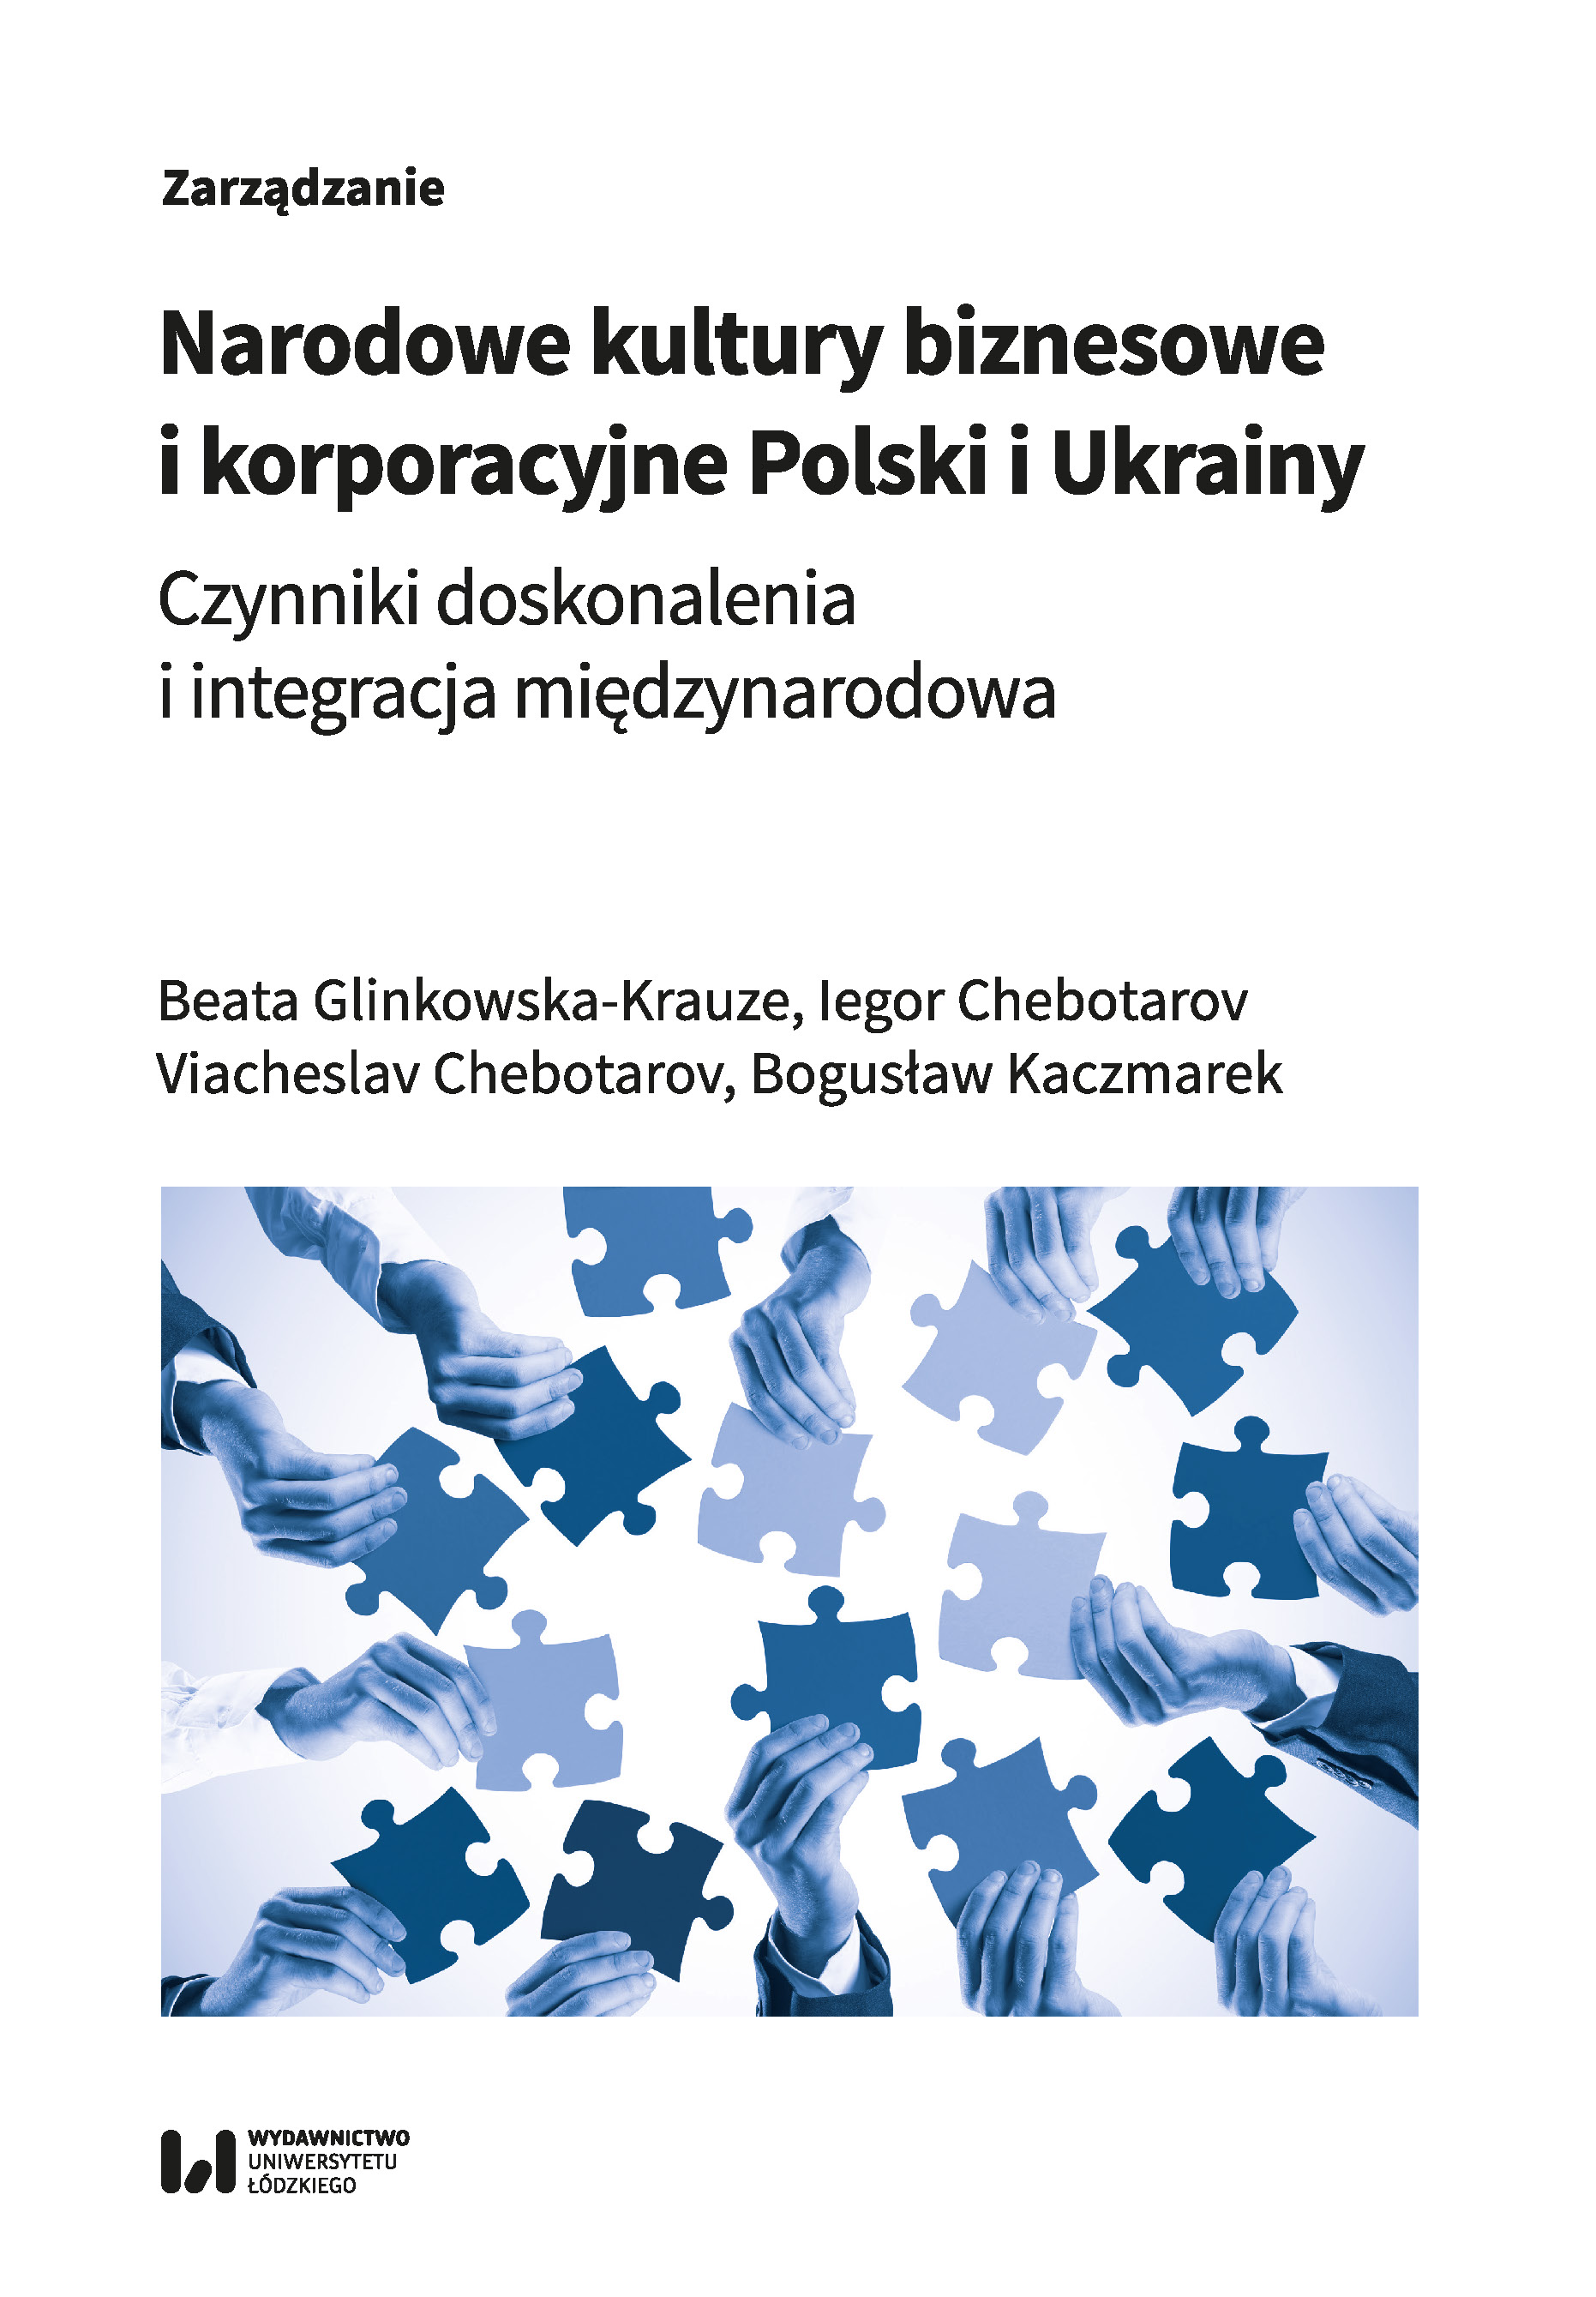 National business cultures of Poland and Ukraine: factors of corporate cultures improvement and international integration